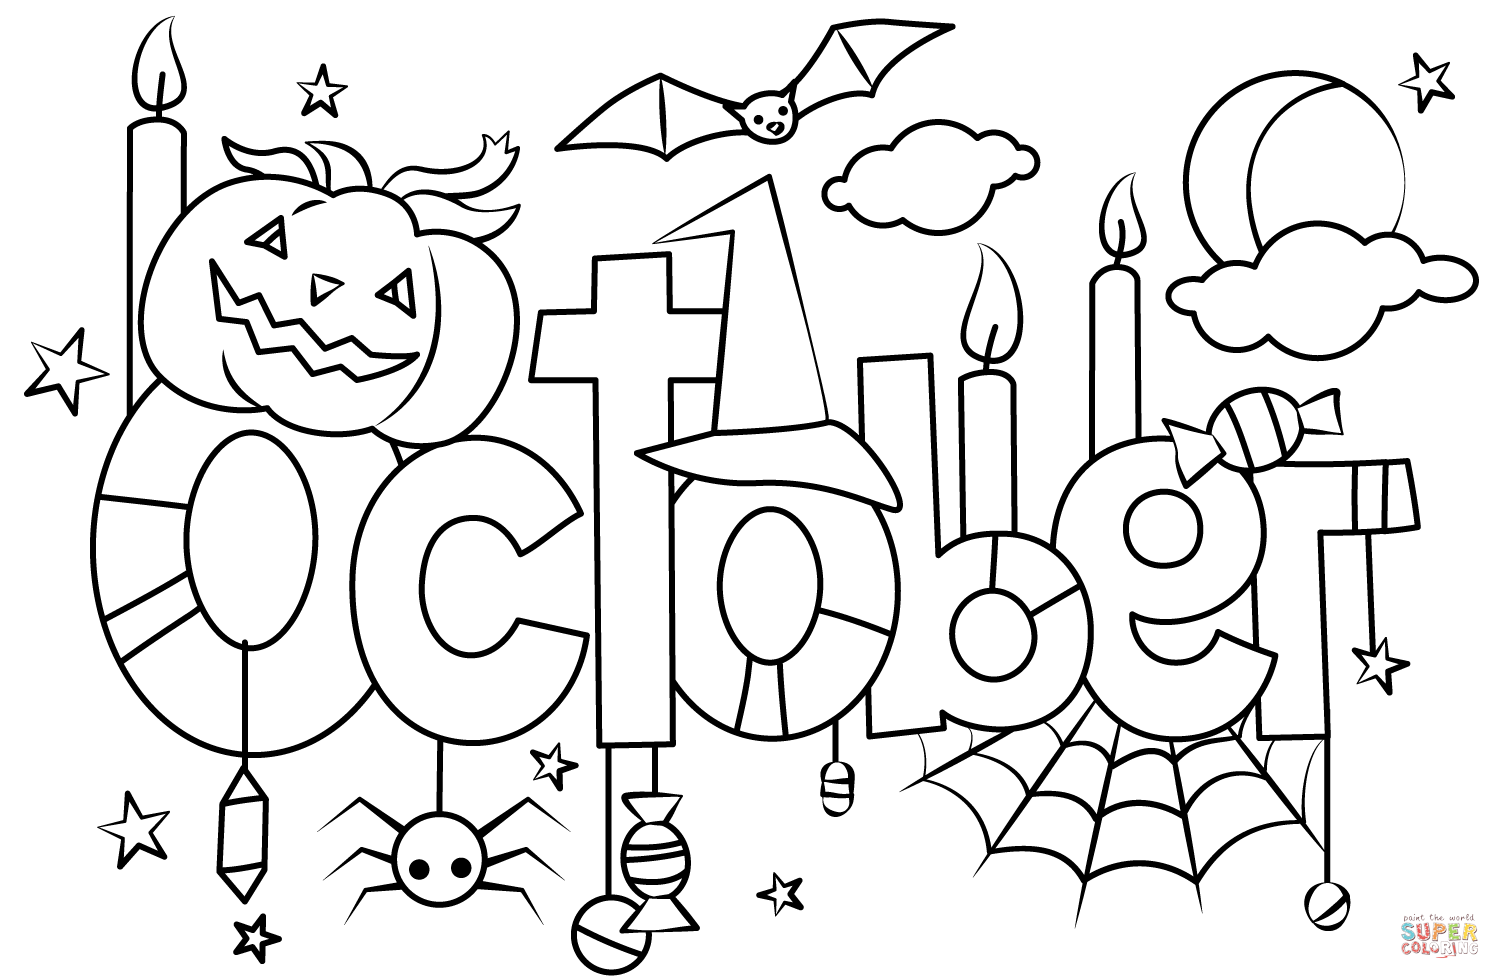 october-coloring-pages-fall-coloring-pages-coloring-pages-for-kids-and-adults